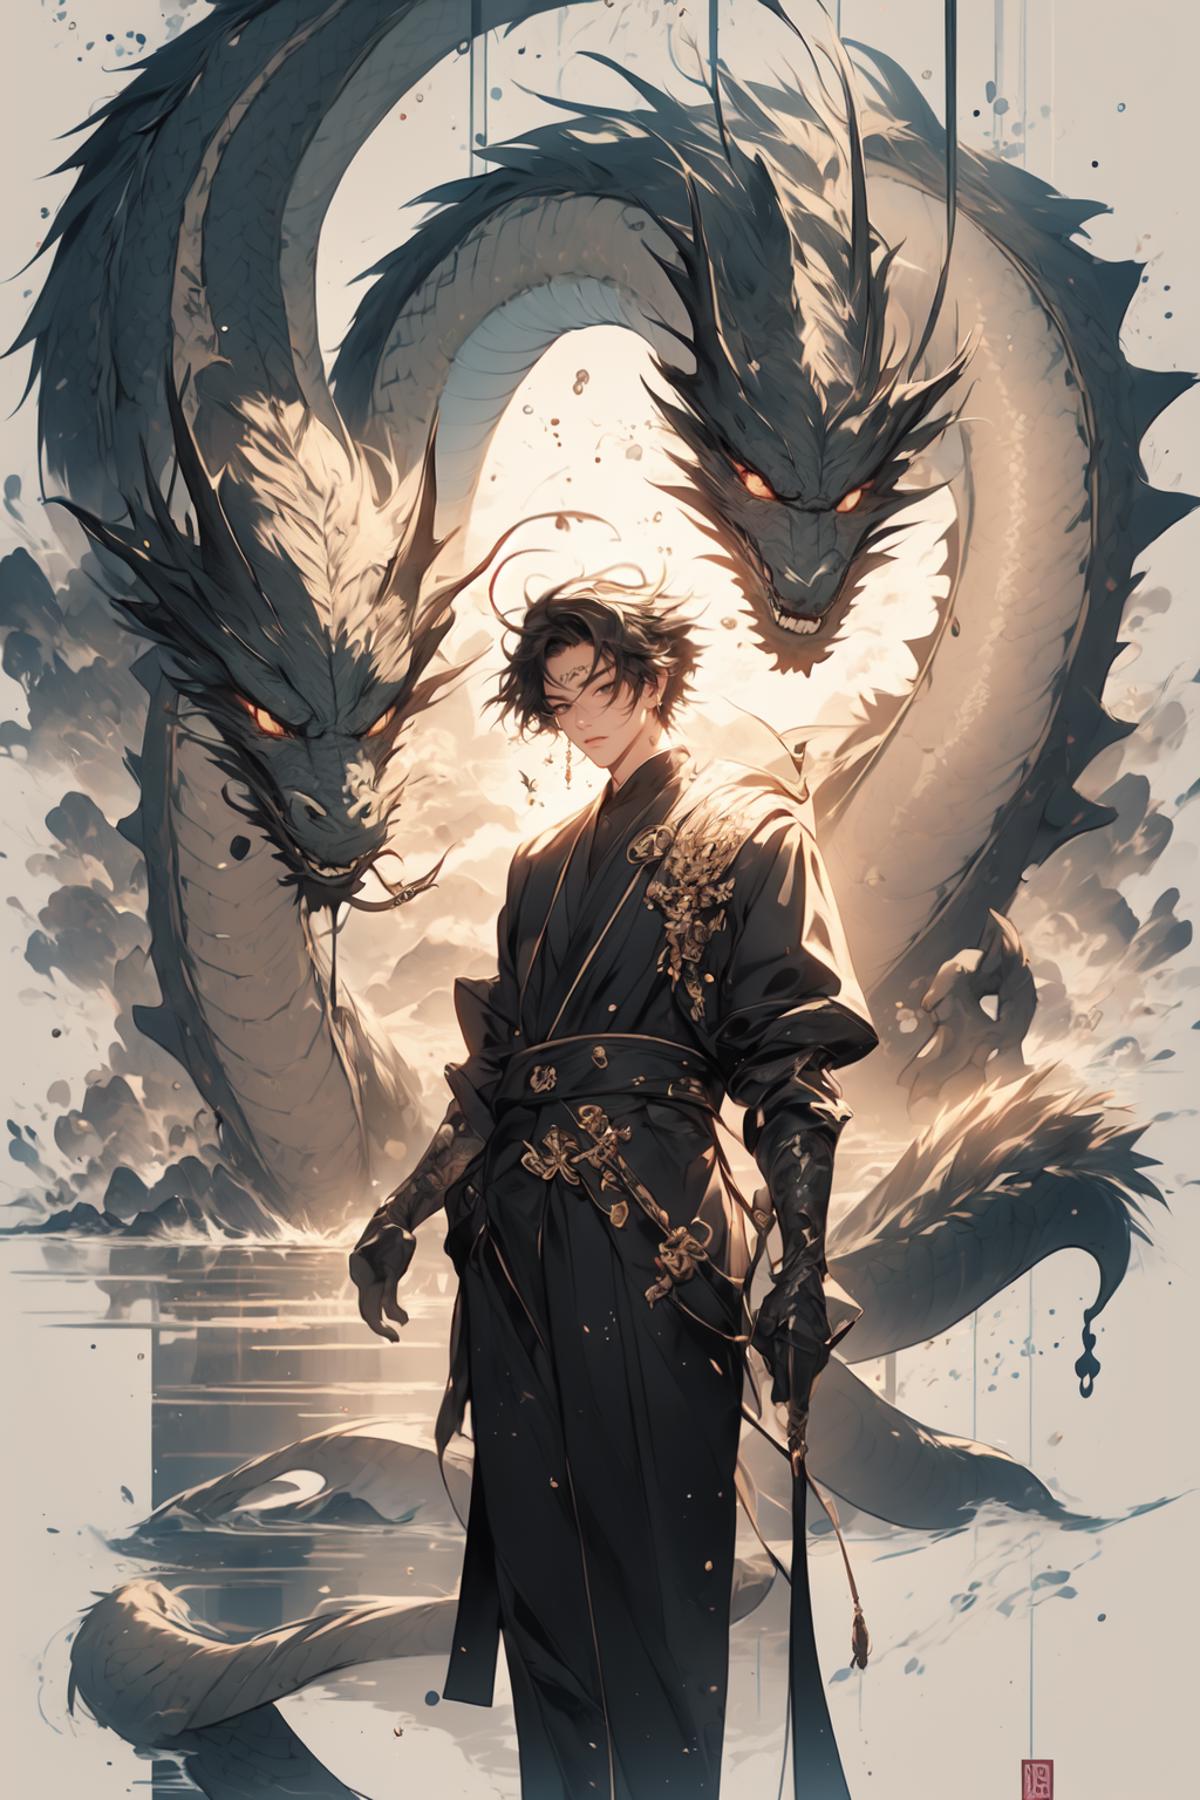 Anime drawing of a young man standing between two dragons.